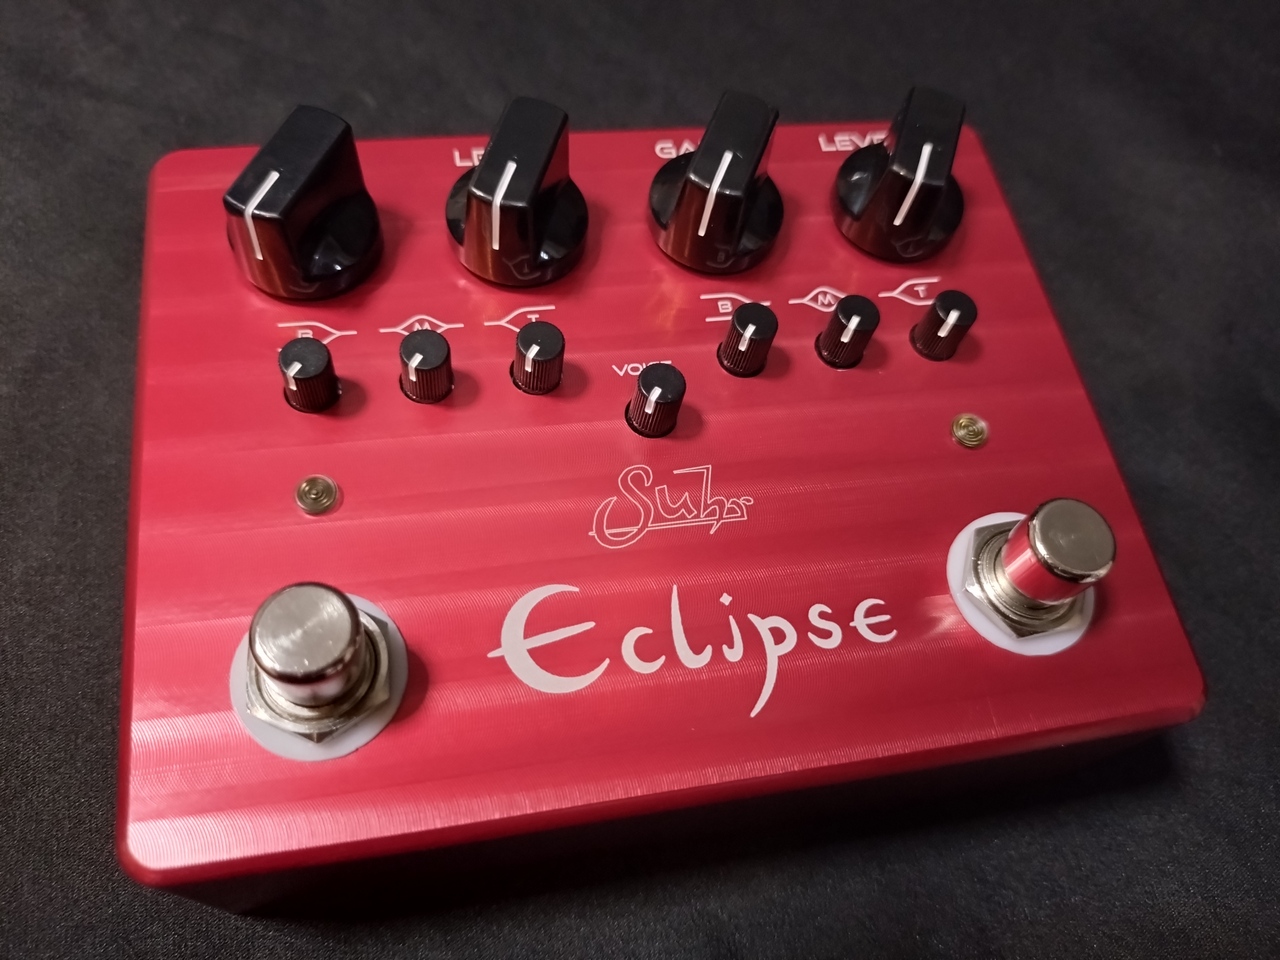 Suhr Eclipse -DUAL CHANNEL OVERDRIVE/DISTORTION PEDAL-（中古）【楽器検索デジマート】